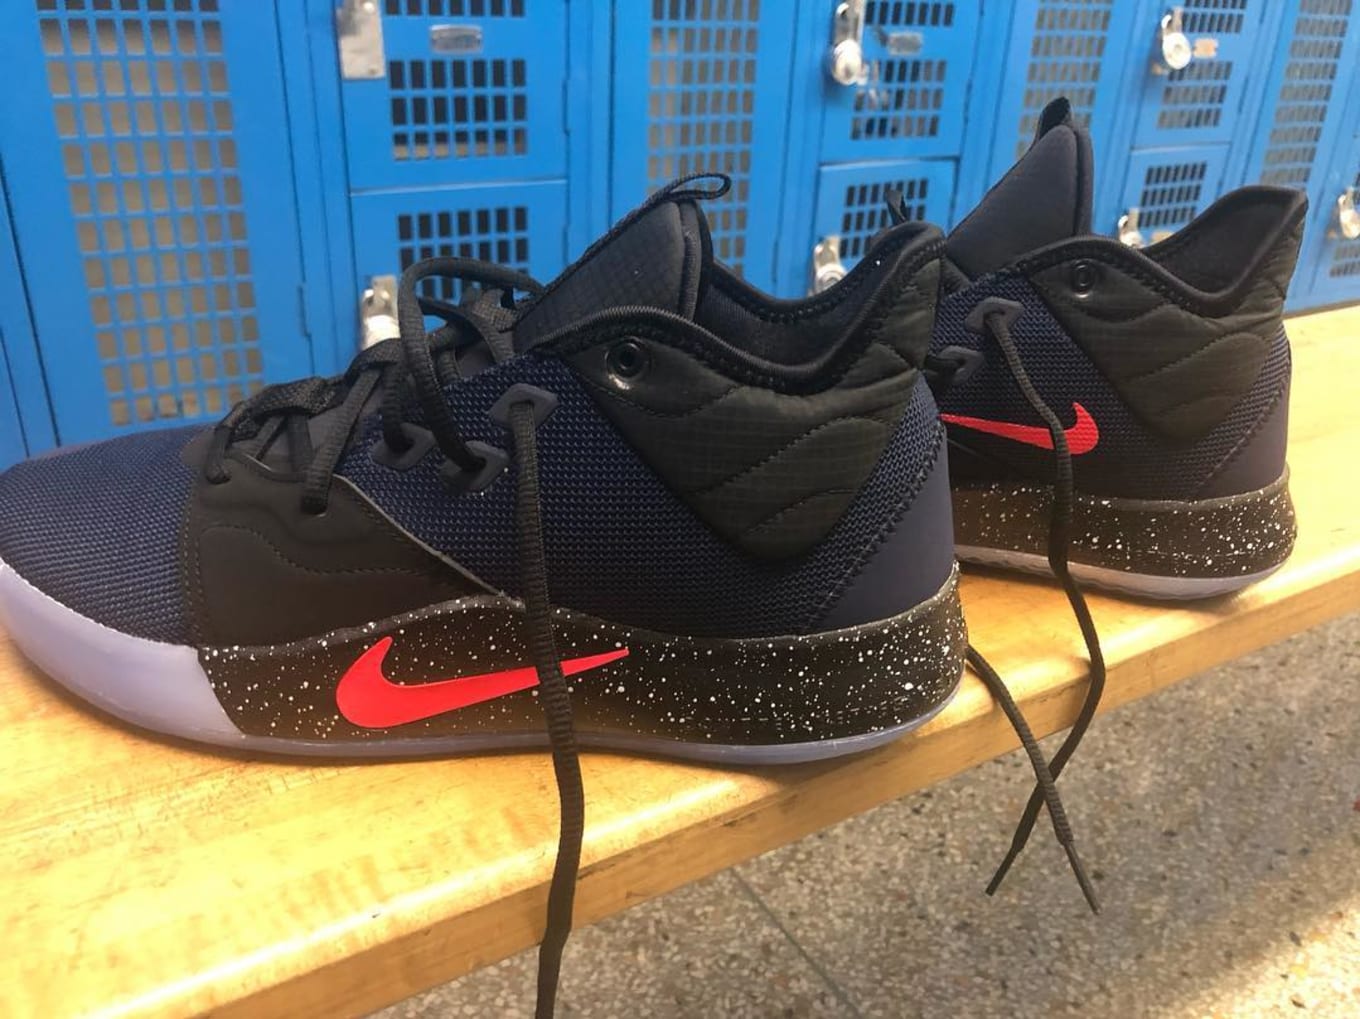 Nike By You PG3 iD Designs | Sole Collector